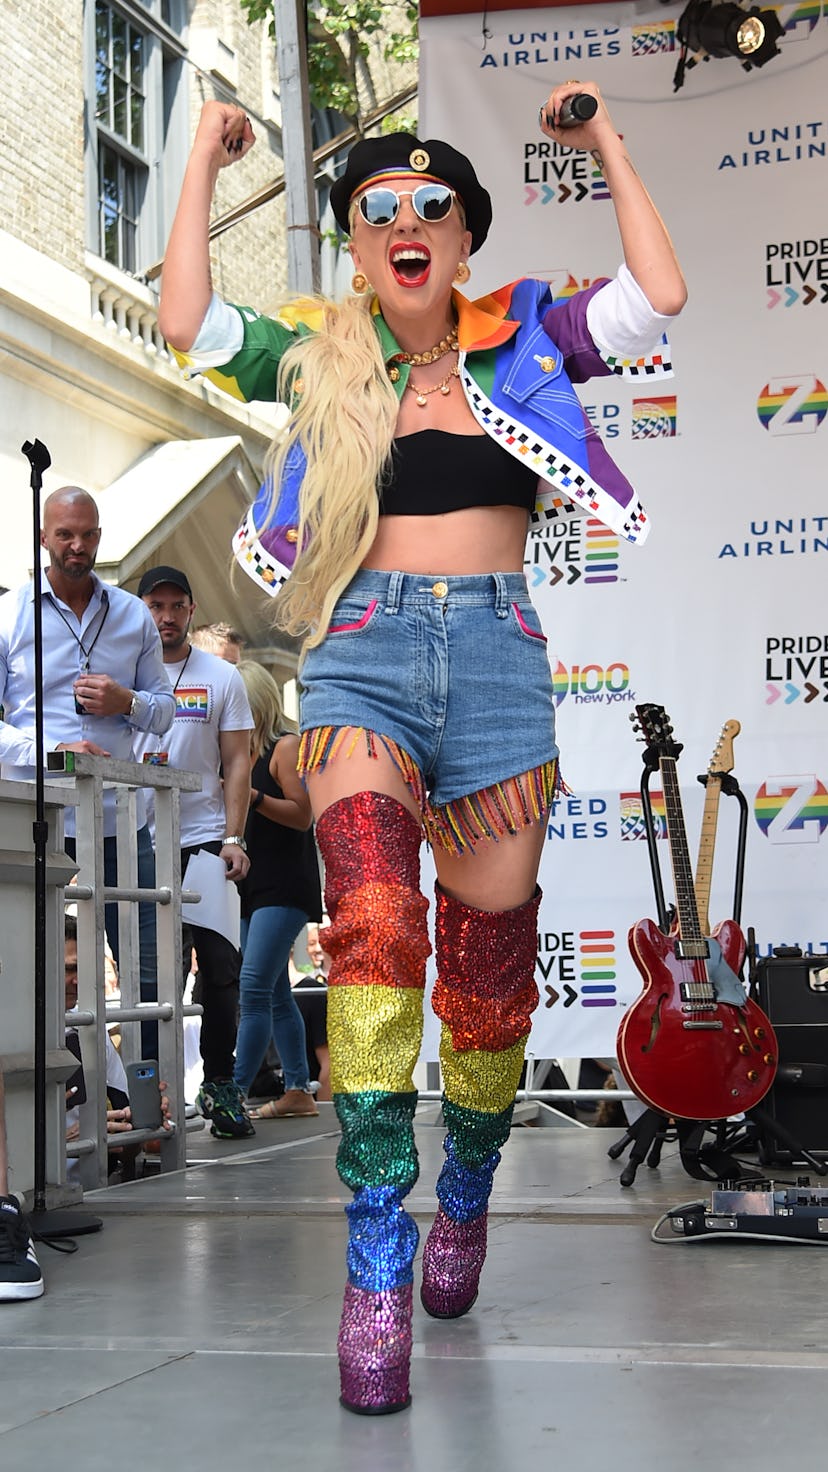 NEW YORK, NEW YORK - JUNE 28:  Lady Gaga speaks onstage during Pride Live's 2019 Stonewall Day on Ju...